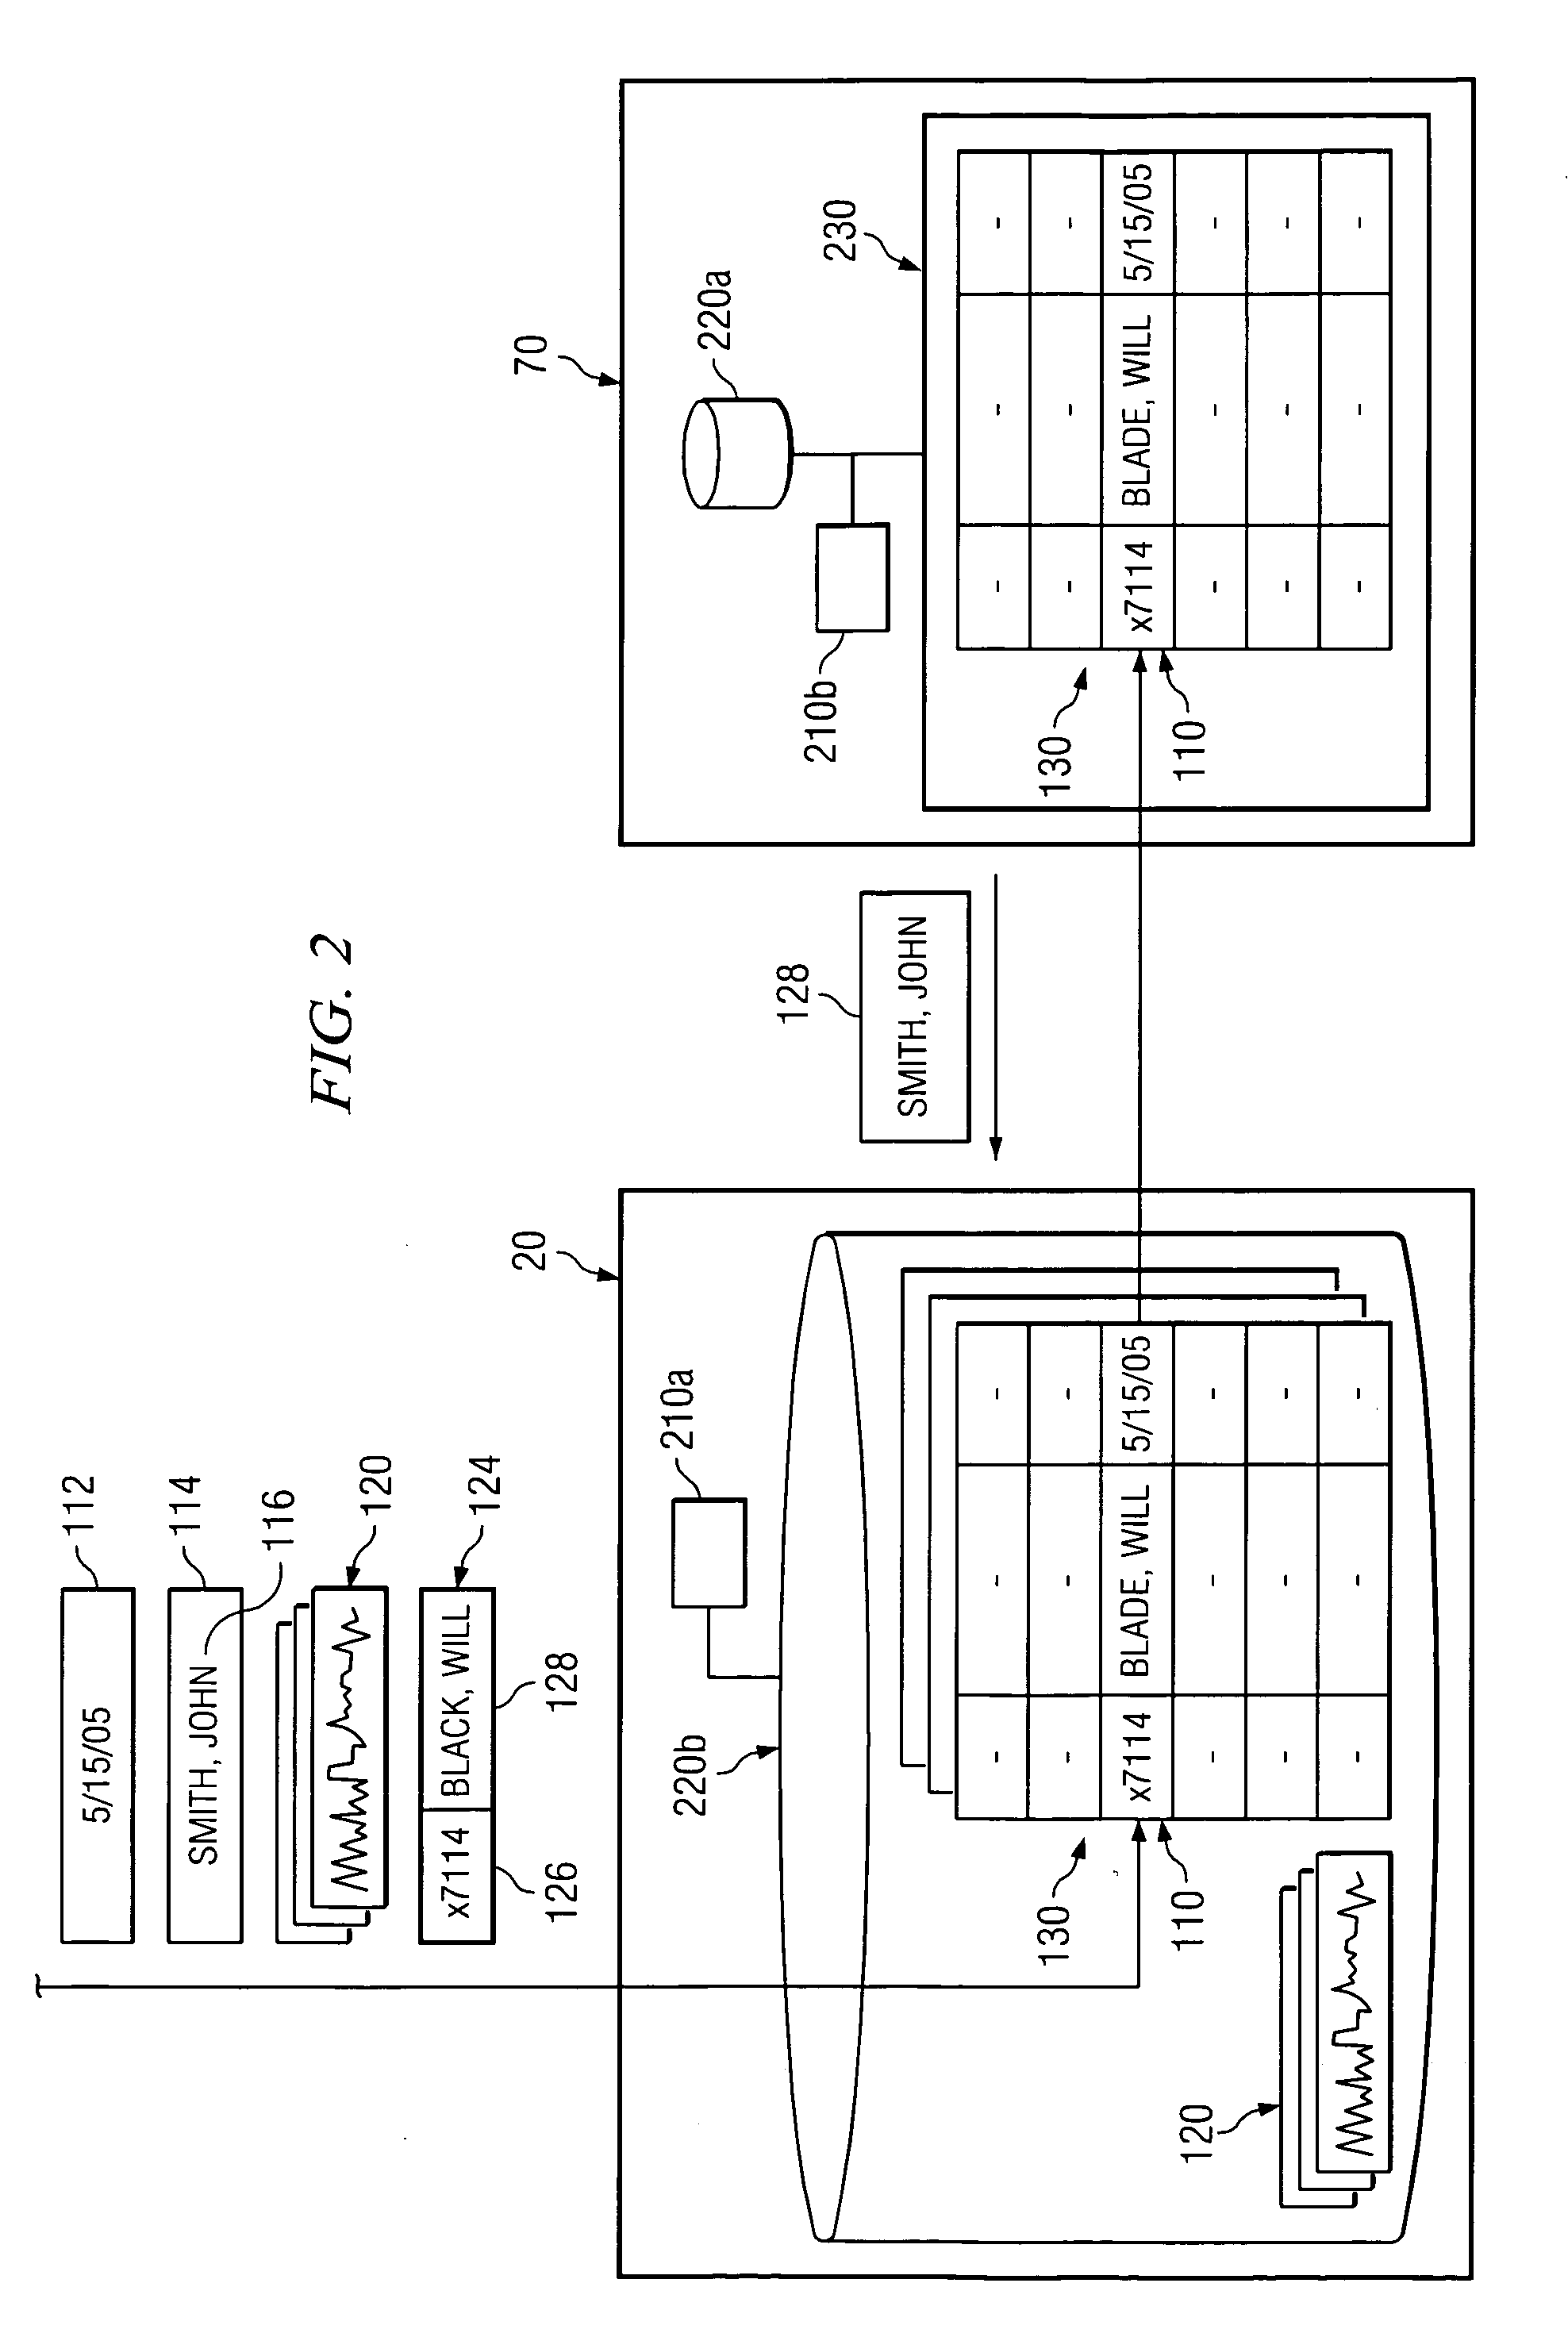 System and method for associating due dates with messages